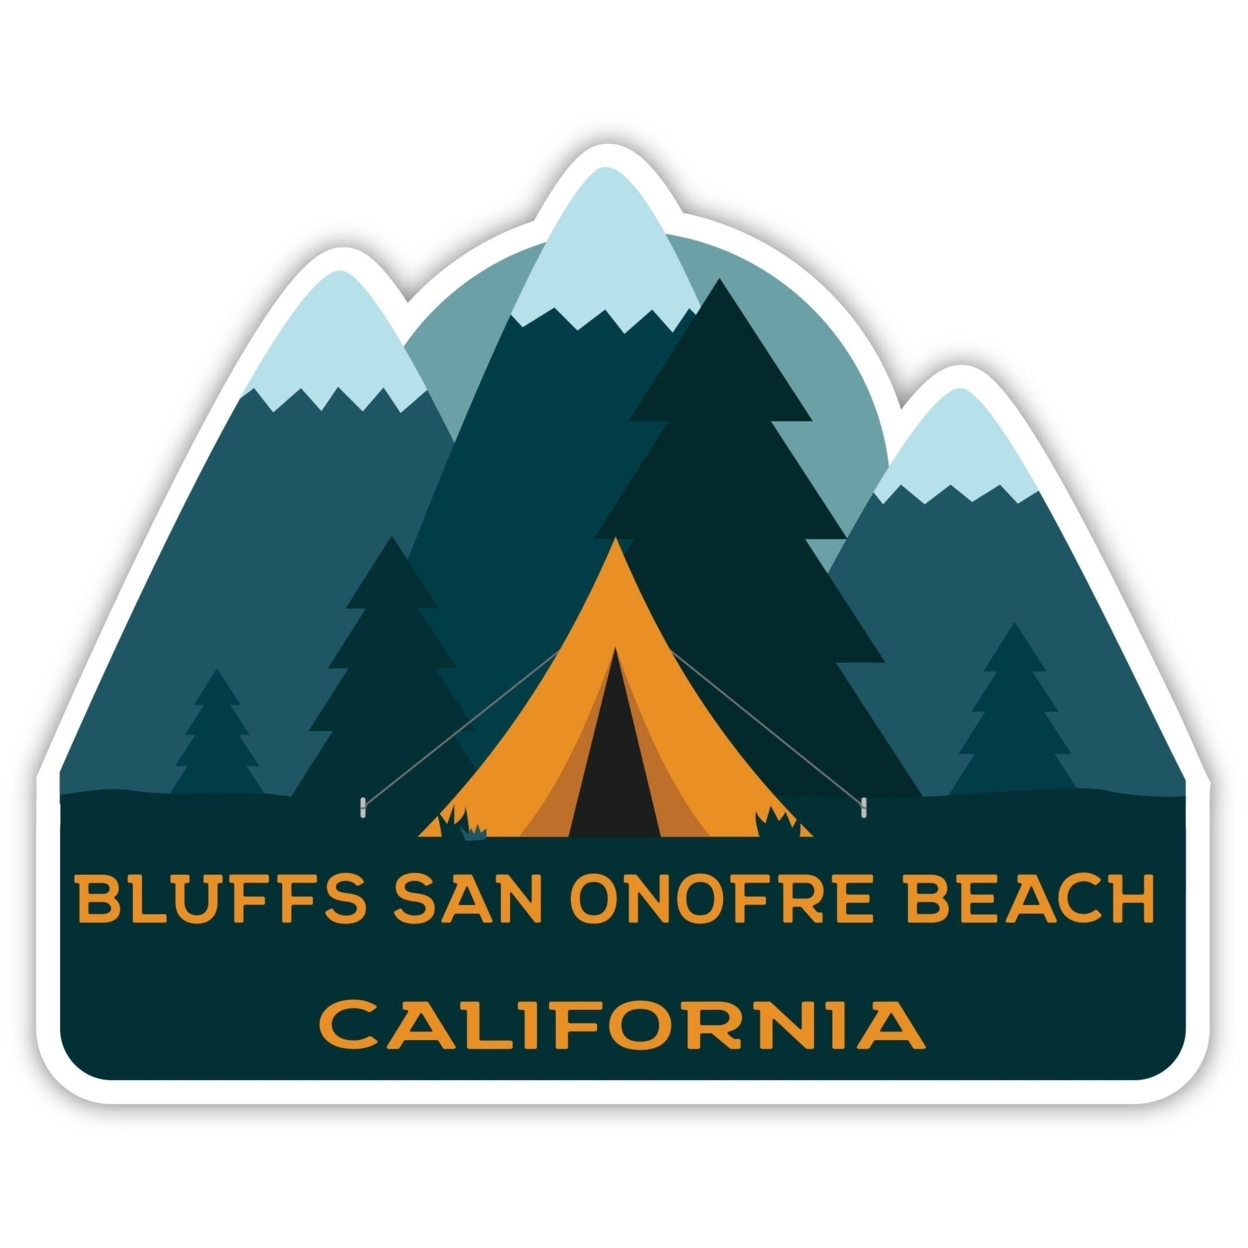 Bluffs San Onofre Beach California Souvenir Decorative Stickers (Choose Theme And Size) - 4-Pack, 4-Inch, Adventures Awaits